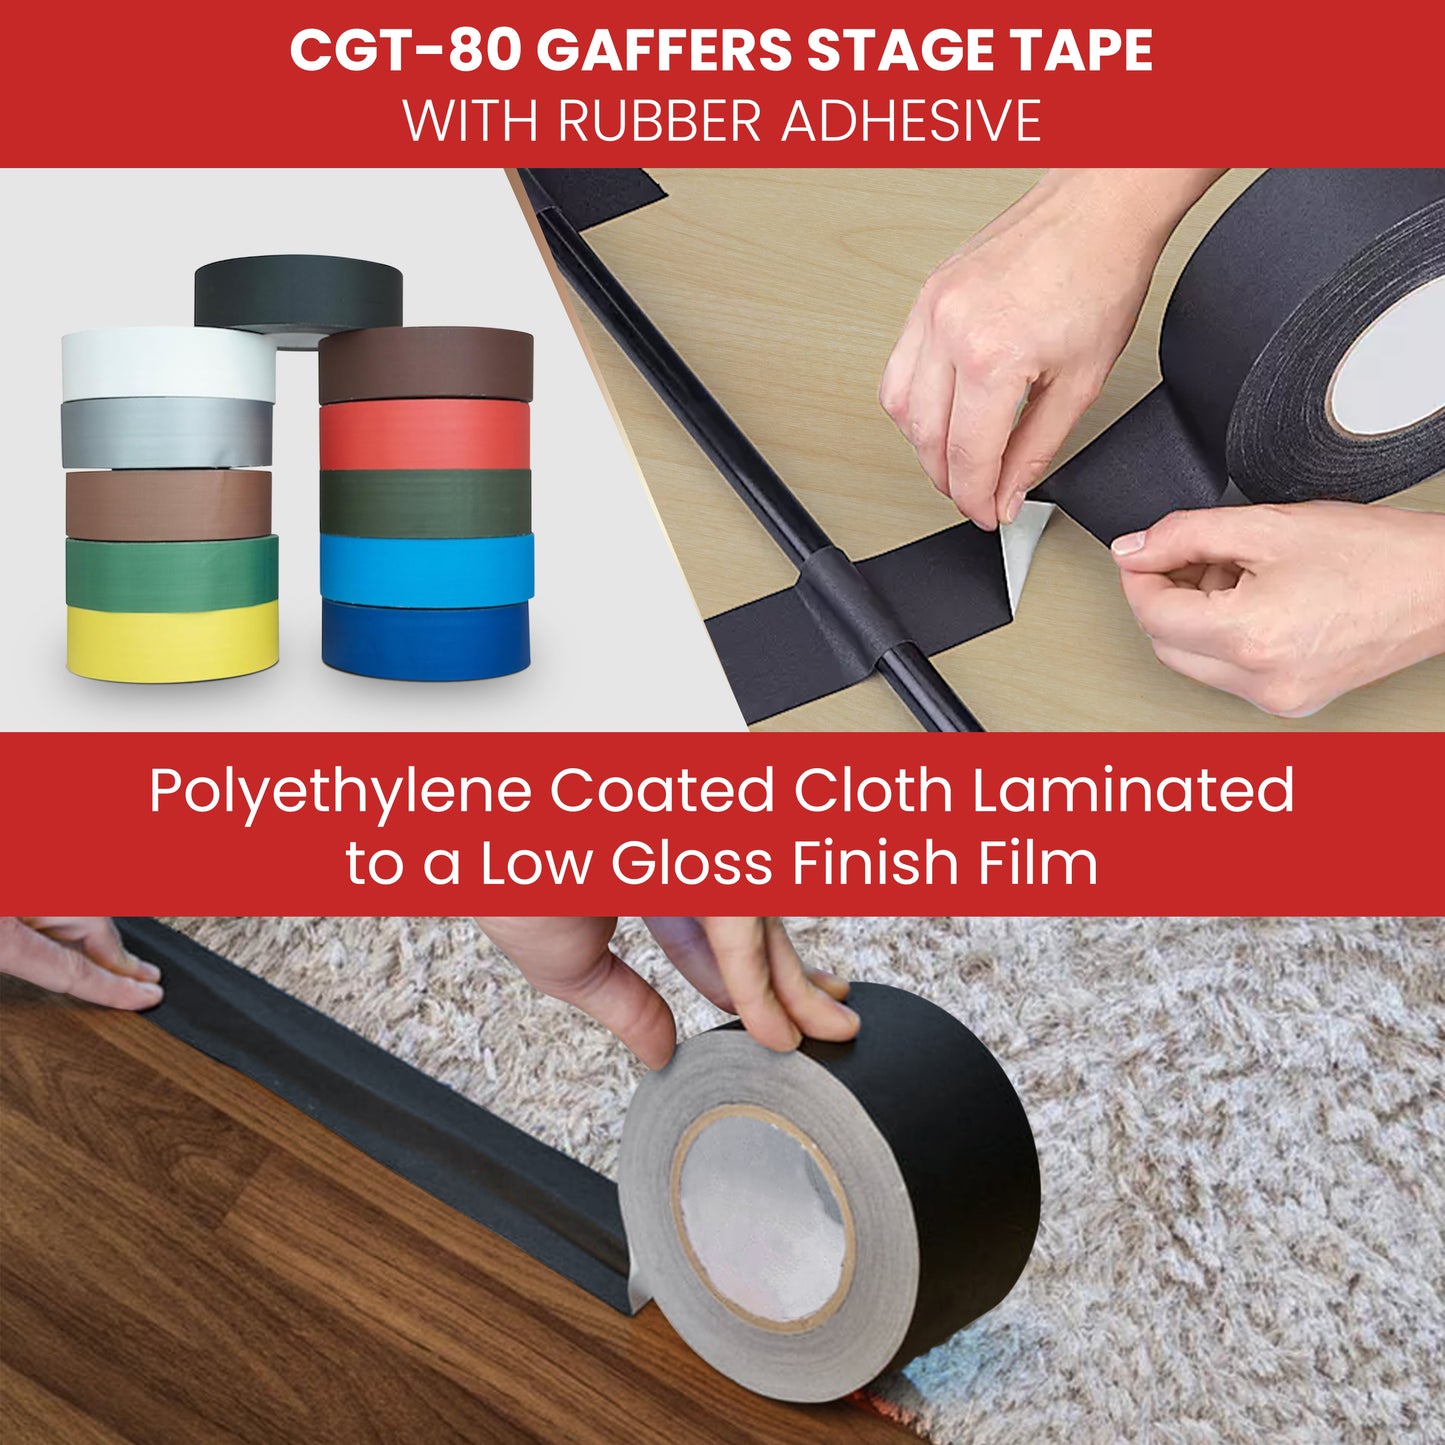 Gaffers Tape with Rubber Adhesive